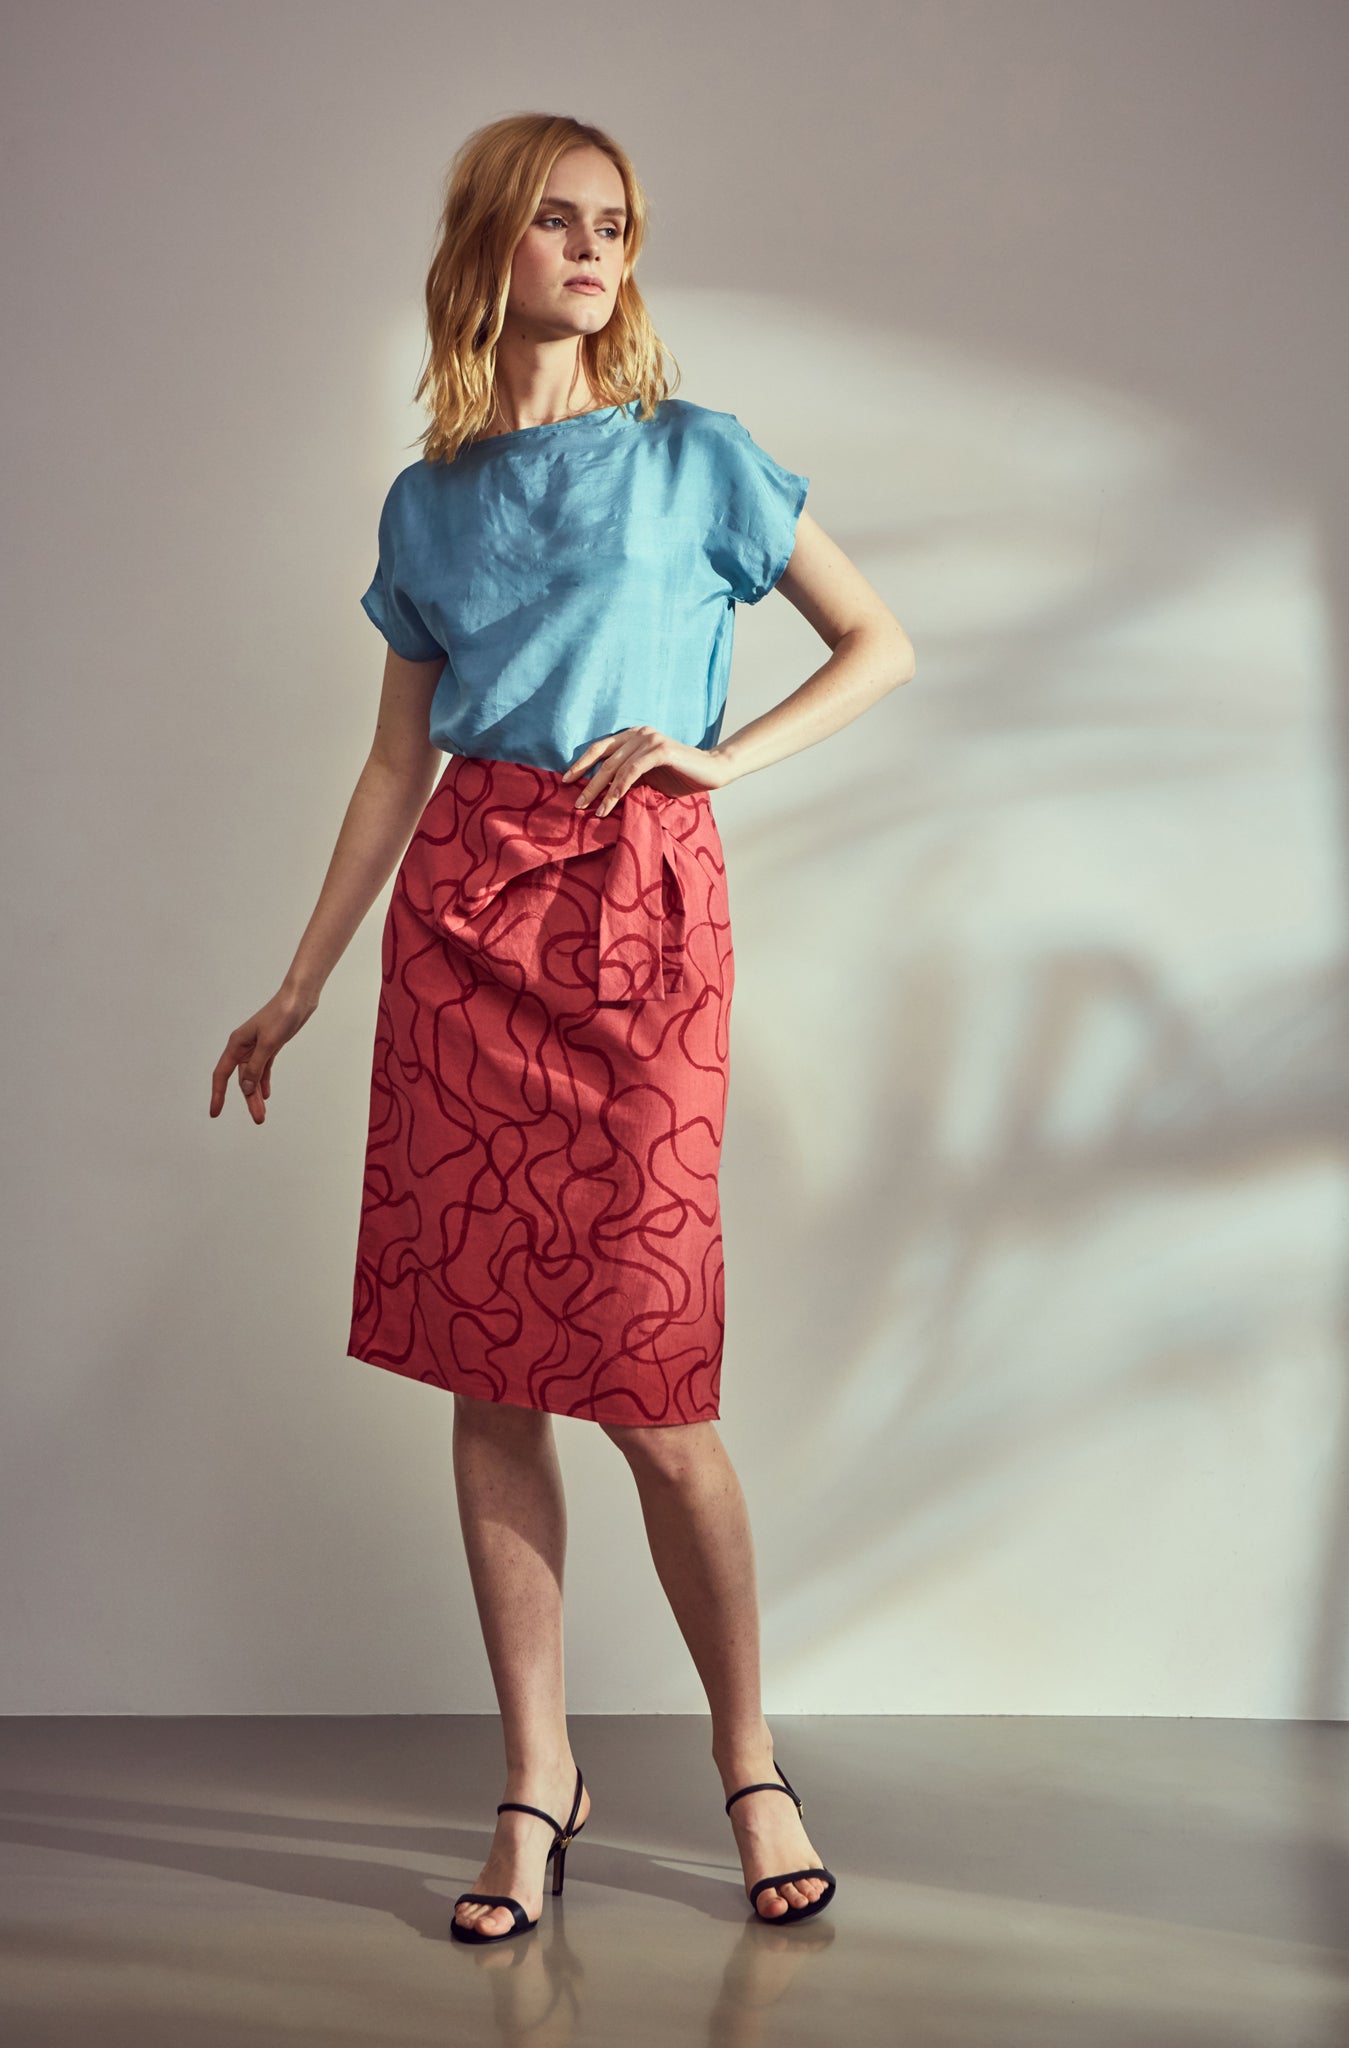 Hand woven cotton skirt, hand printed khadi cotton, made by hand. Sustainable luxury brand Robe de Voyage brings you affordable luxury that supports rural communities of women in India by supporting local crafts and traditions. 